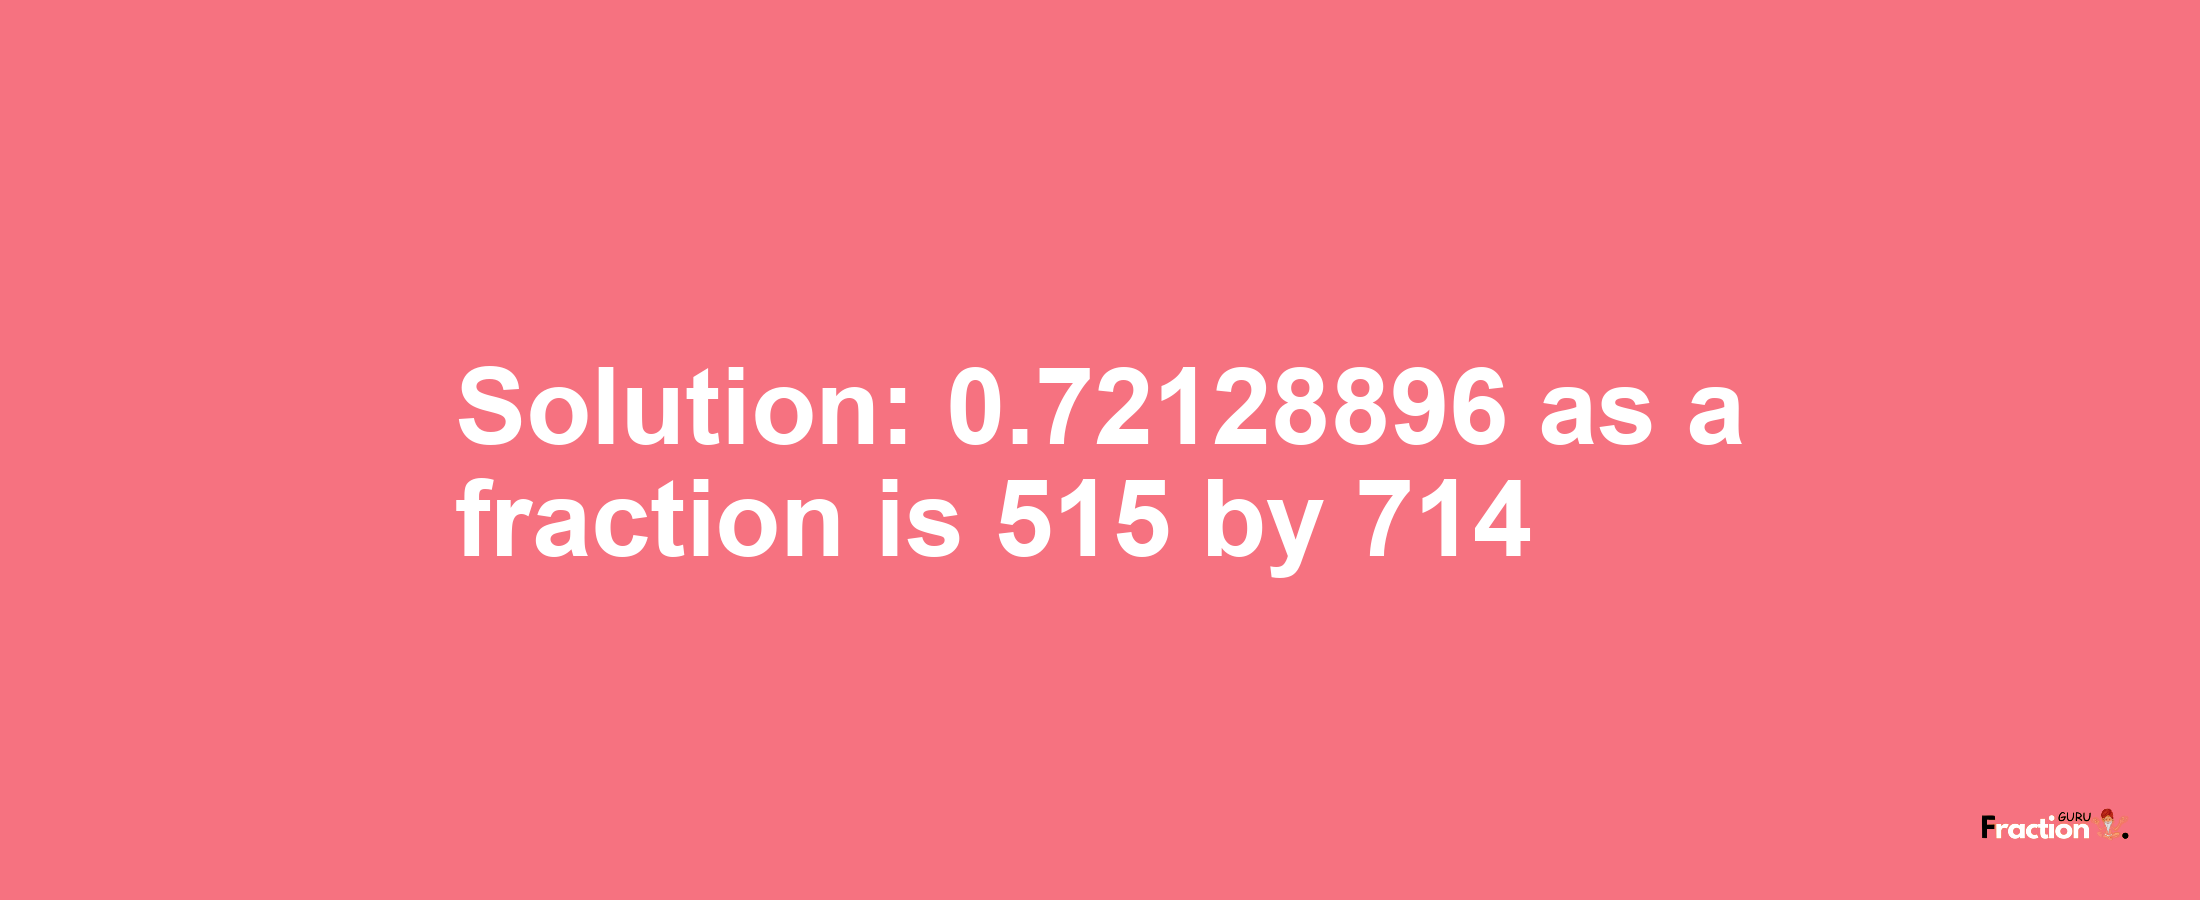 Solution:0.72128896 as a fraction is 515/714